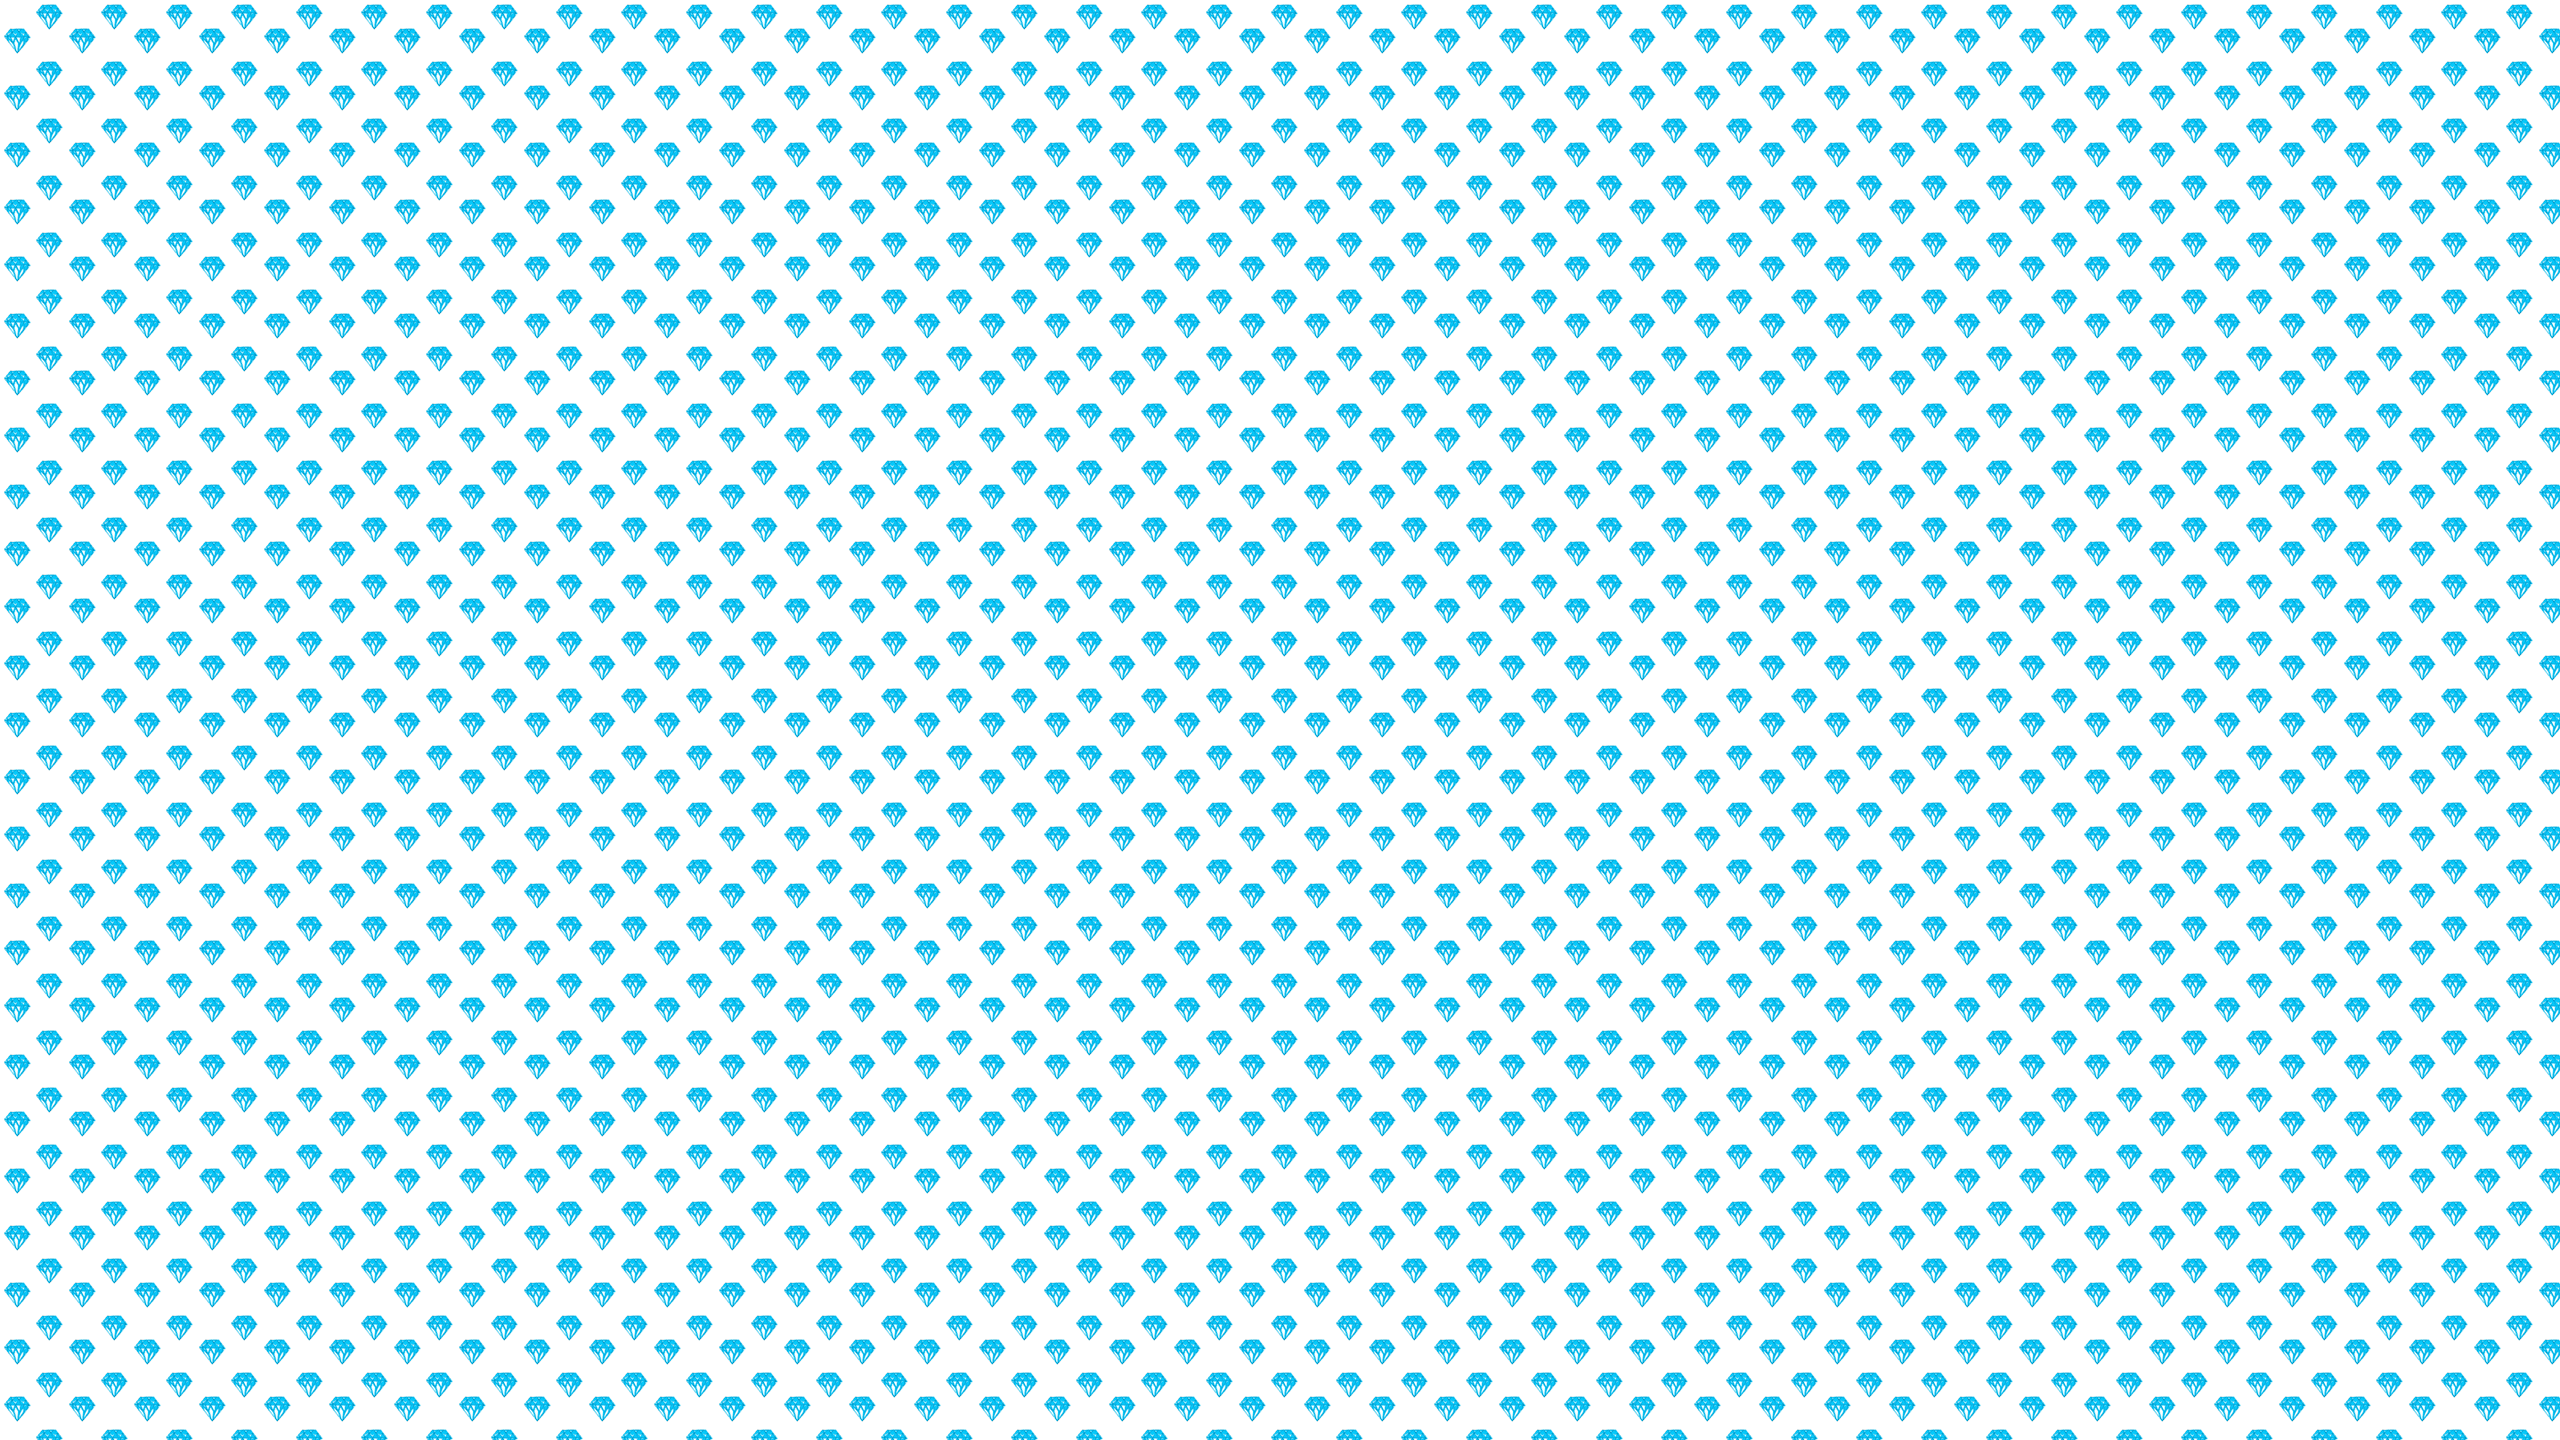 This Blue Diamonds Desktop Wallpaper Is Easy Just Save The